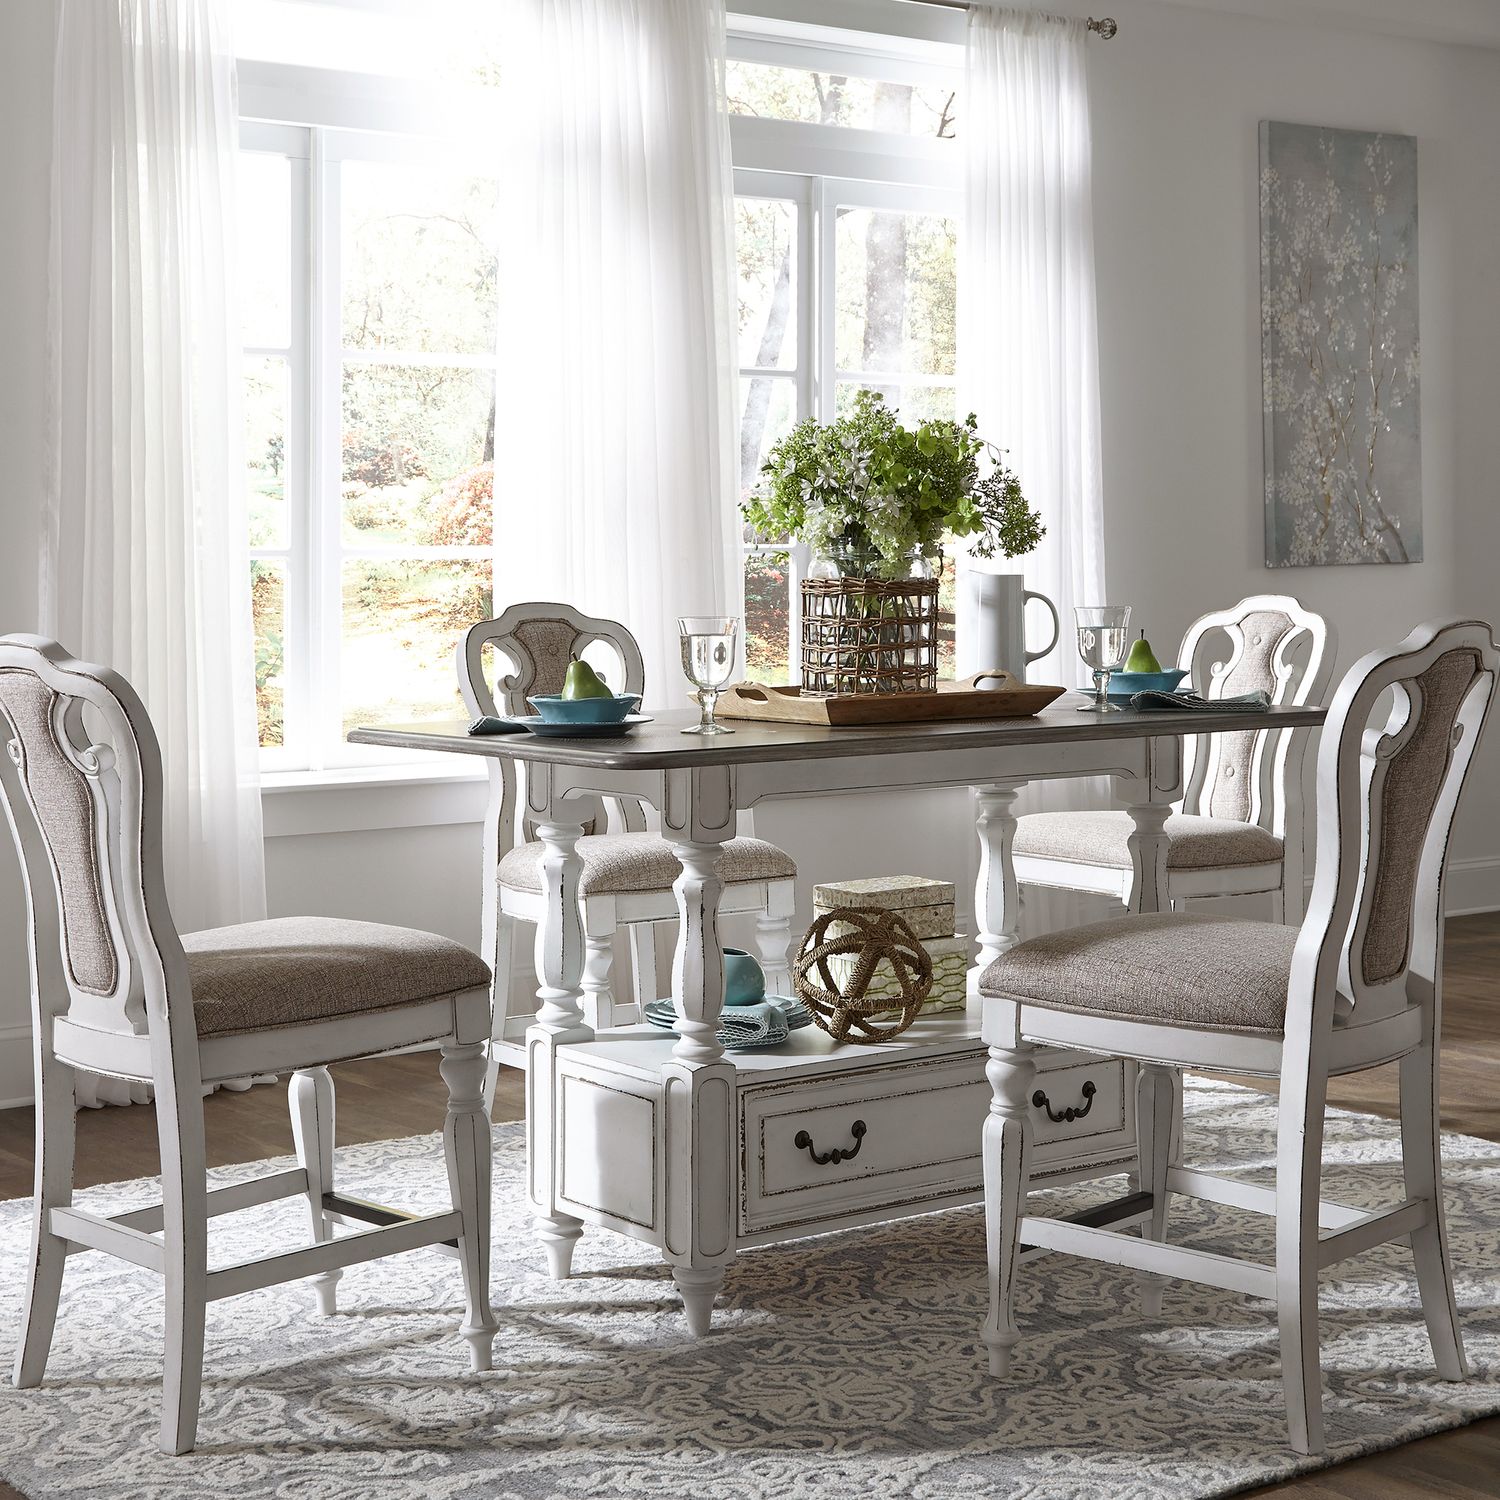 Magnolia Manor 5 Piece Gathering Table Set by Liberty SKU: 244-DR-5GTS